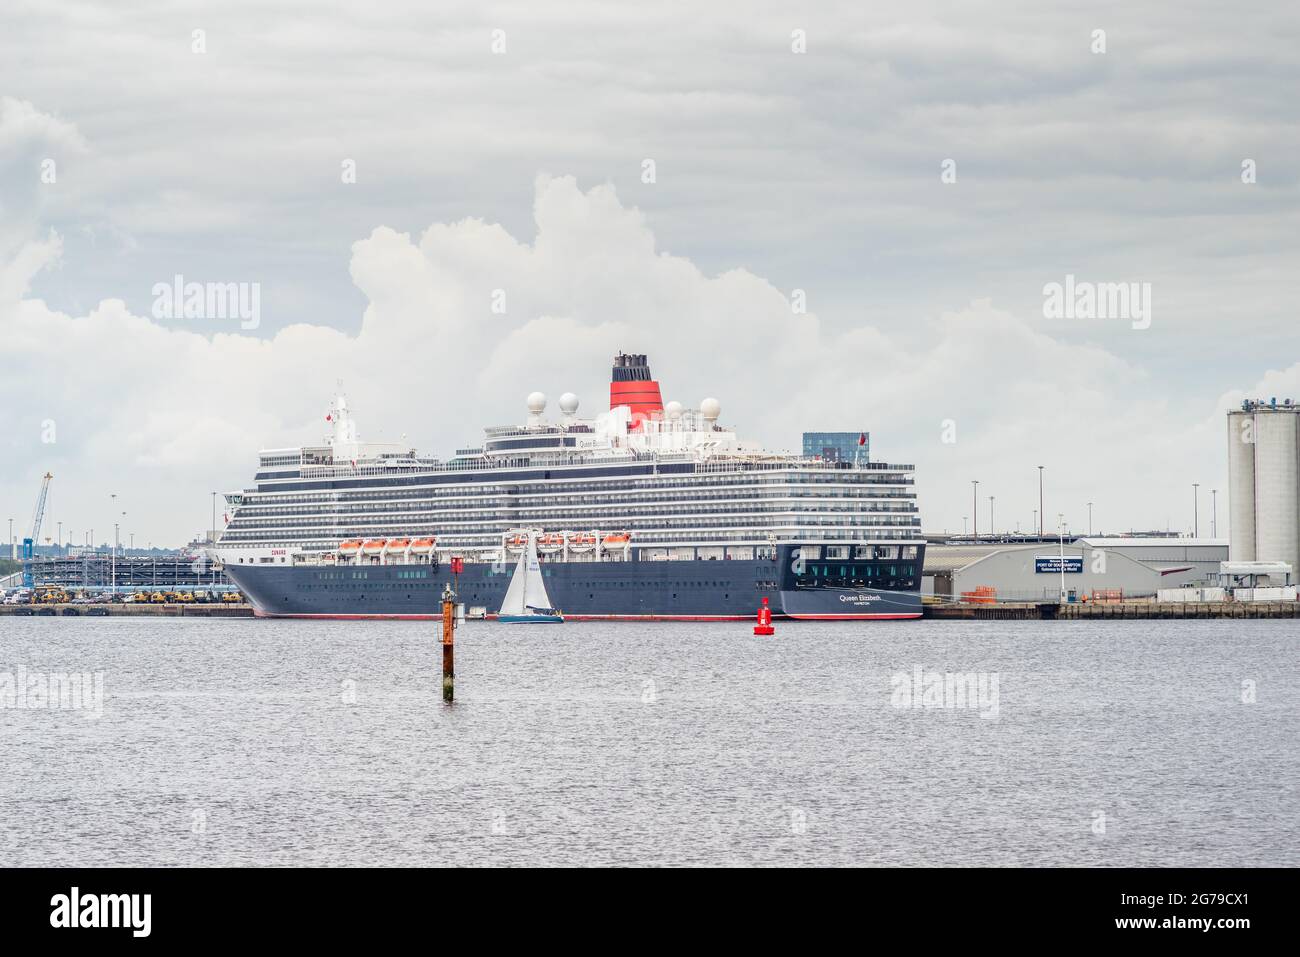 Southampton, UK. 8 July 2021. The Cunard Queen Elizabeth cruise ship docked in the Port of Southampton, as seen from Hythe marina,after it returned earlier this week due to staff testing positive for Covid-19 Stock Photo